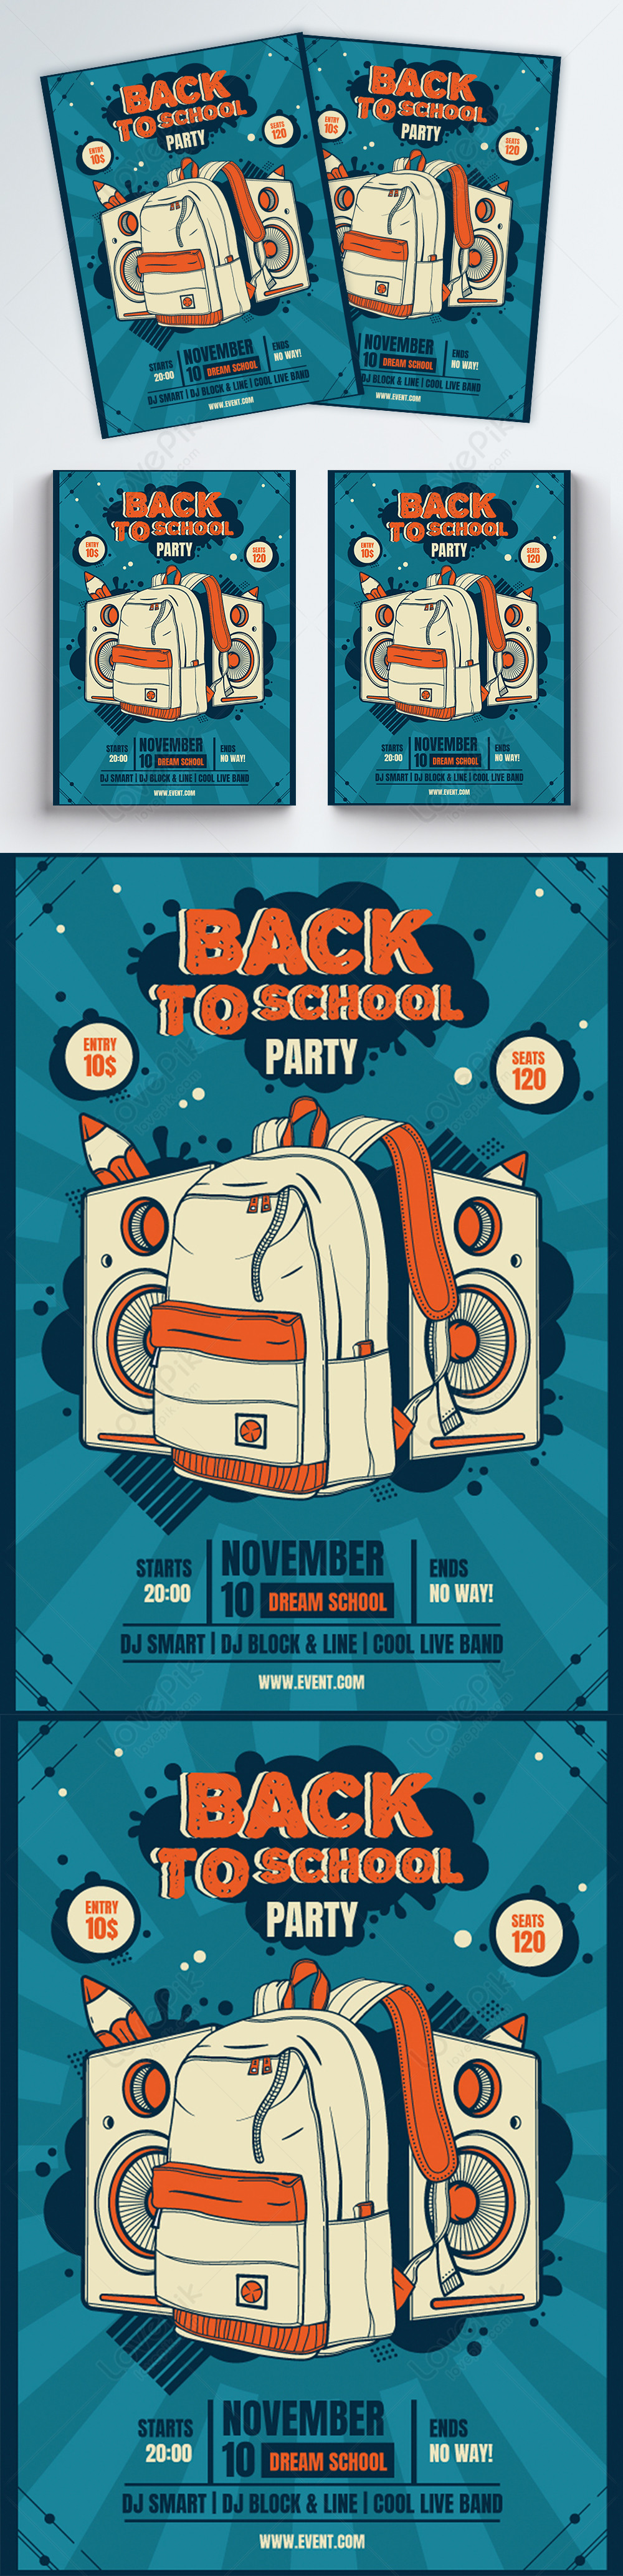 back-to-school-flyer-template-image-picture-free-download-450096925